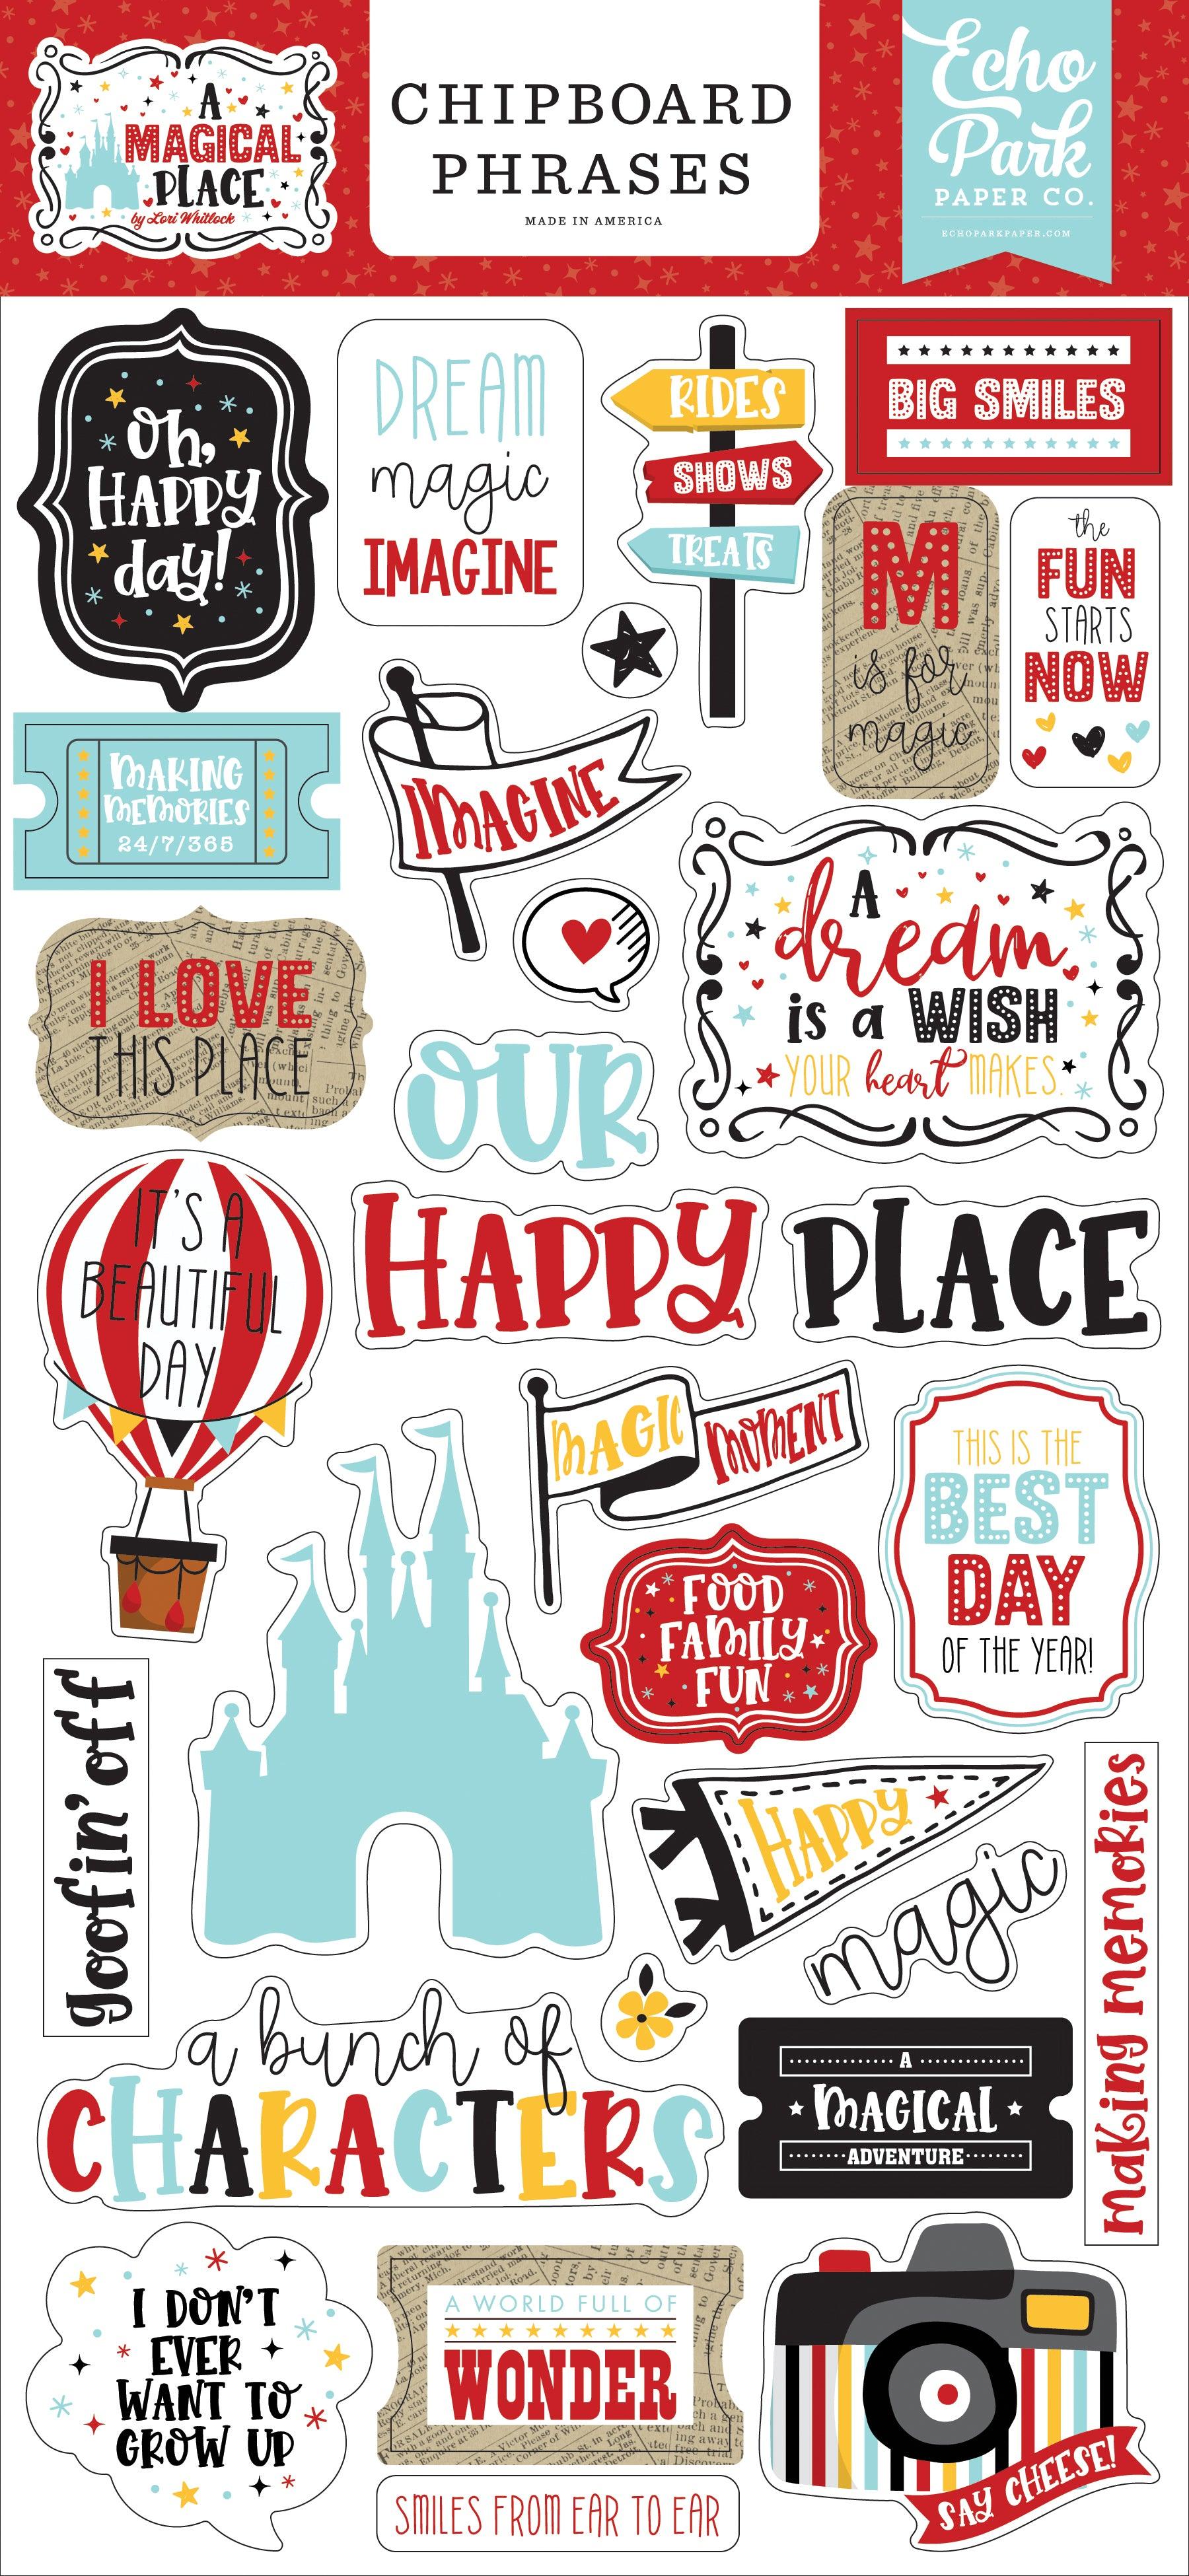 A Magical Place Collection 6 x 12 Chipboard Phrases Scrapbook Embellishments by Echo Park Paper - Scrapbook Supply Companies